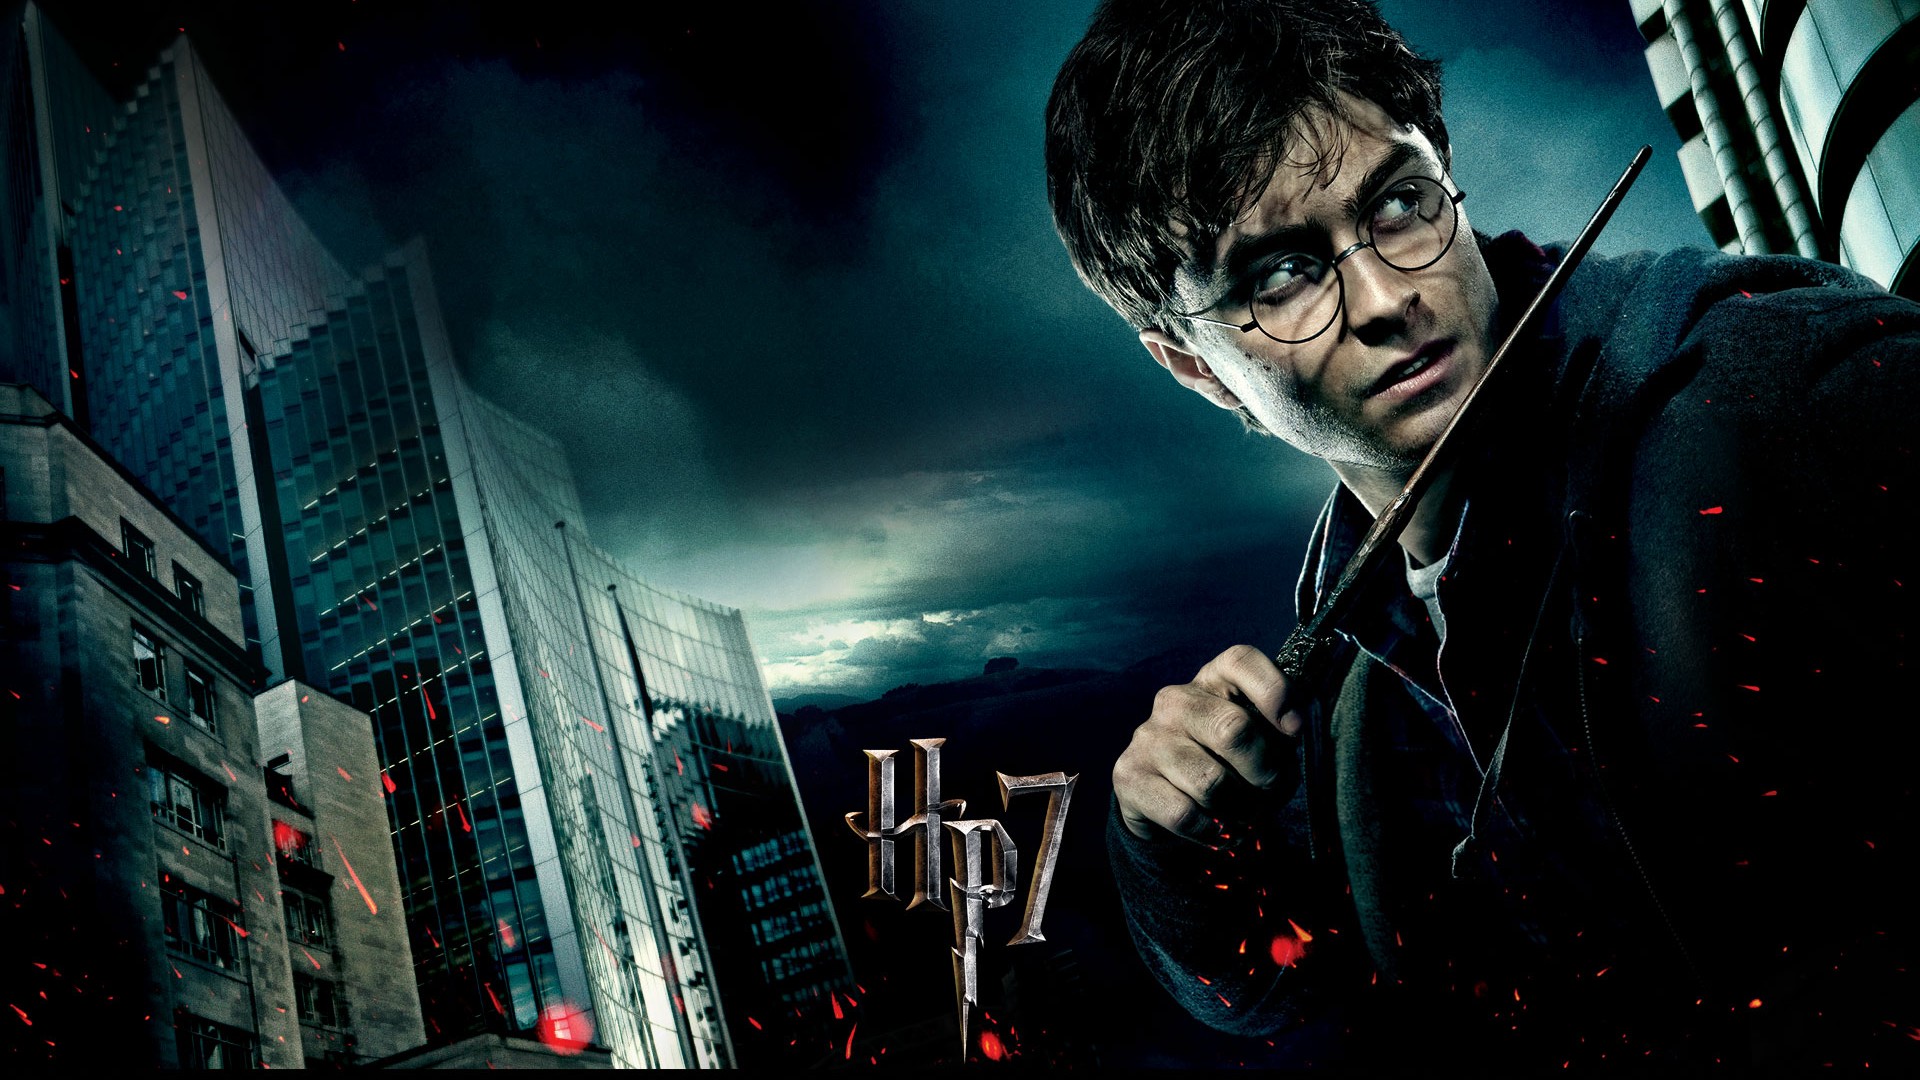 Harry Potter And Deathly Hallows Wallpaper for Desktop and Mobiles iPhone 7  Plus / iPhone 8 Plus - HD Wallpaper 